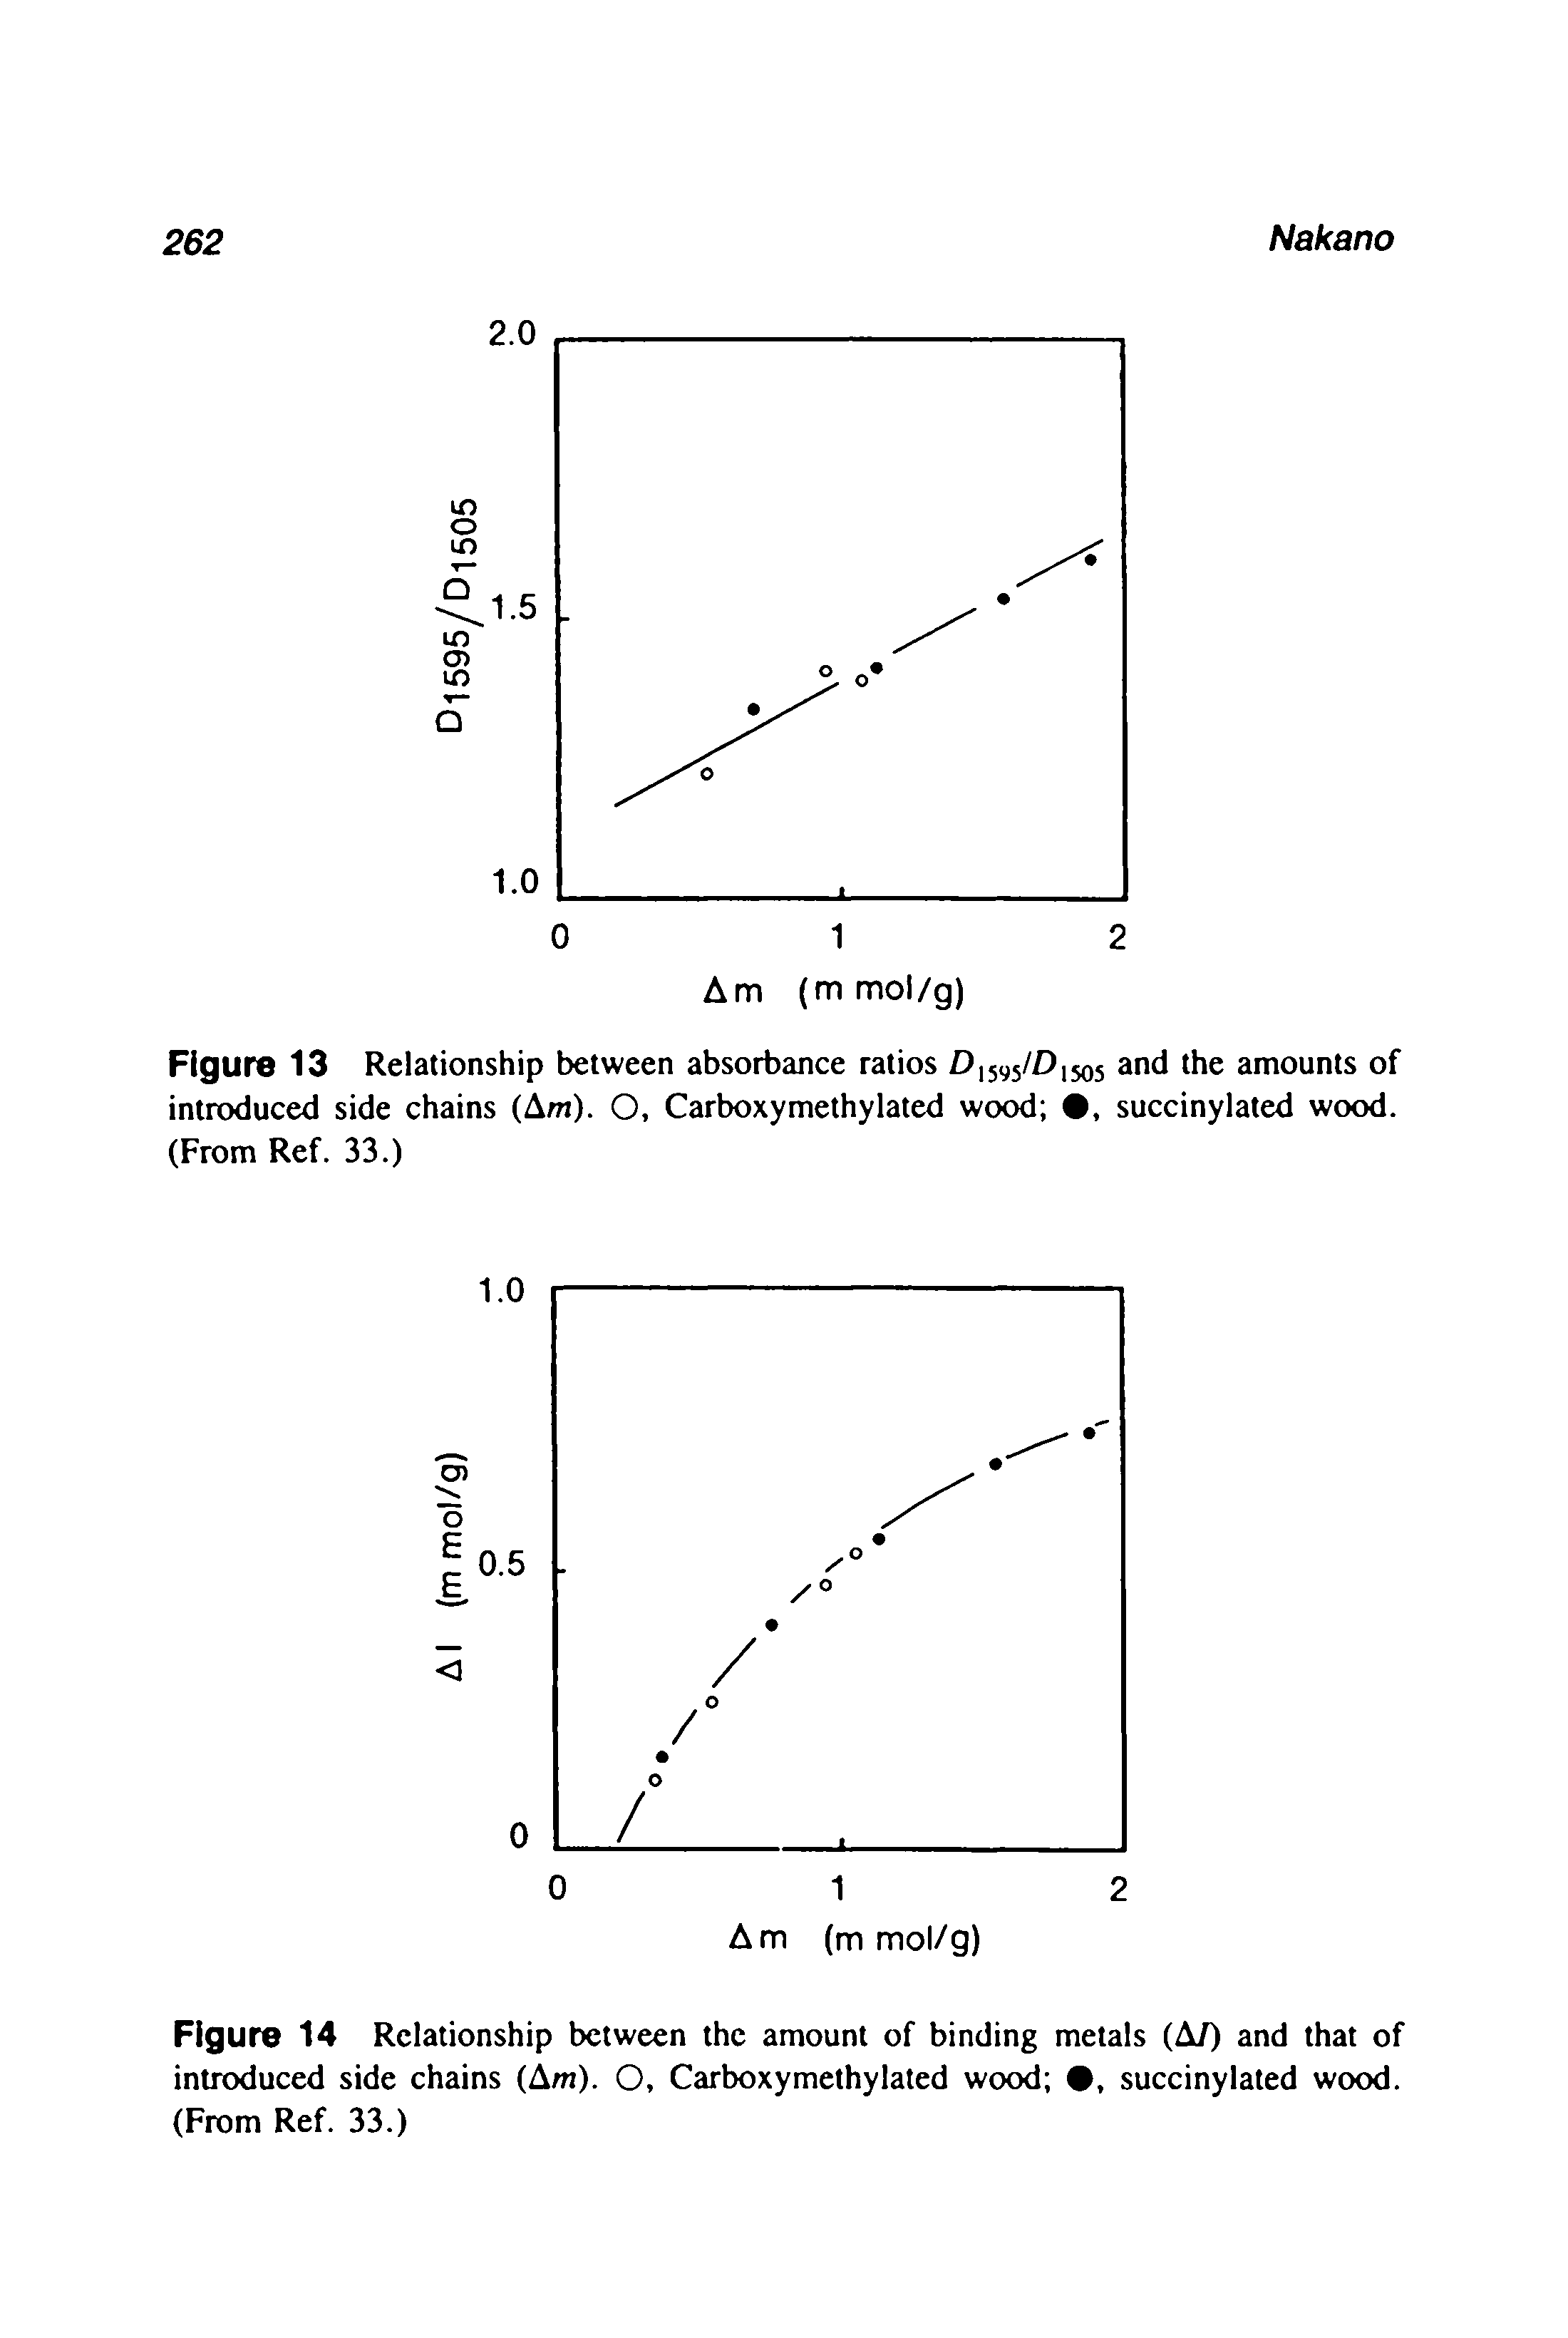 Figure 13 Relationship between absorbance ratios >1595//) 1505 and the amounts of introduced side chains (Am). O, Carboxymethylated wood , succinylated wood. (From Ref. 33.)...